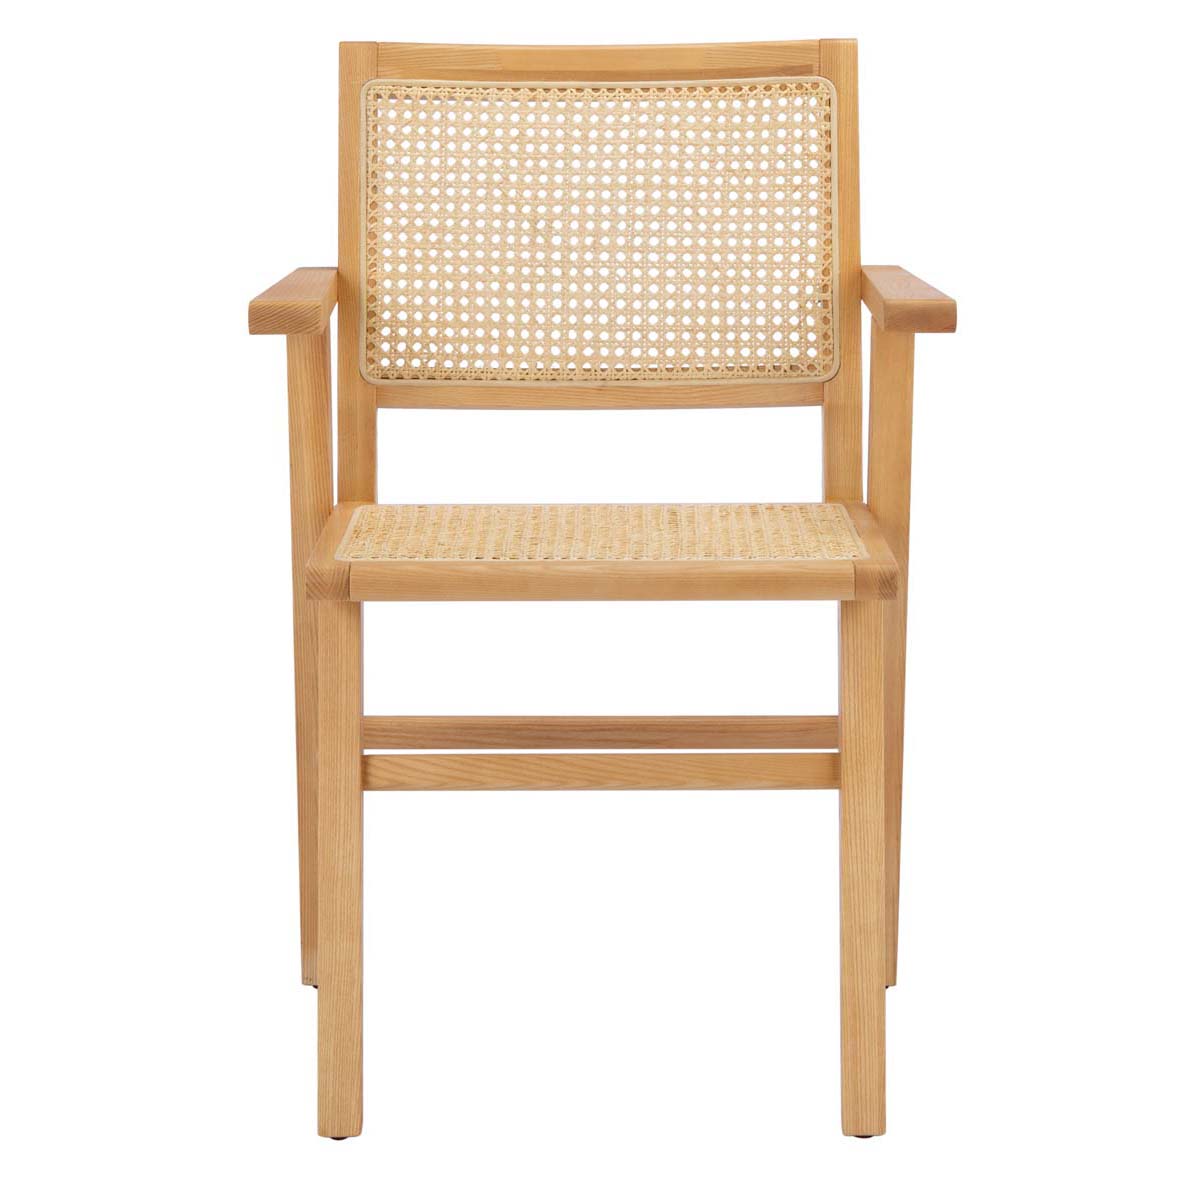 Safavieh Couture Hattie French Cane Arm Chair - Natural